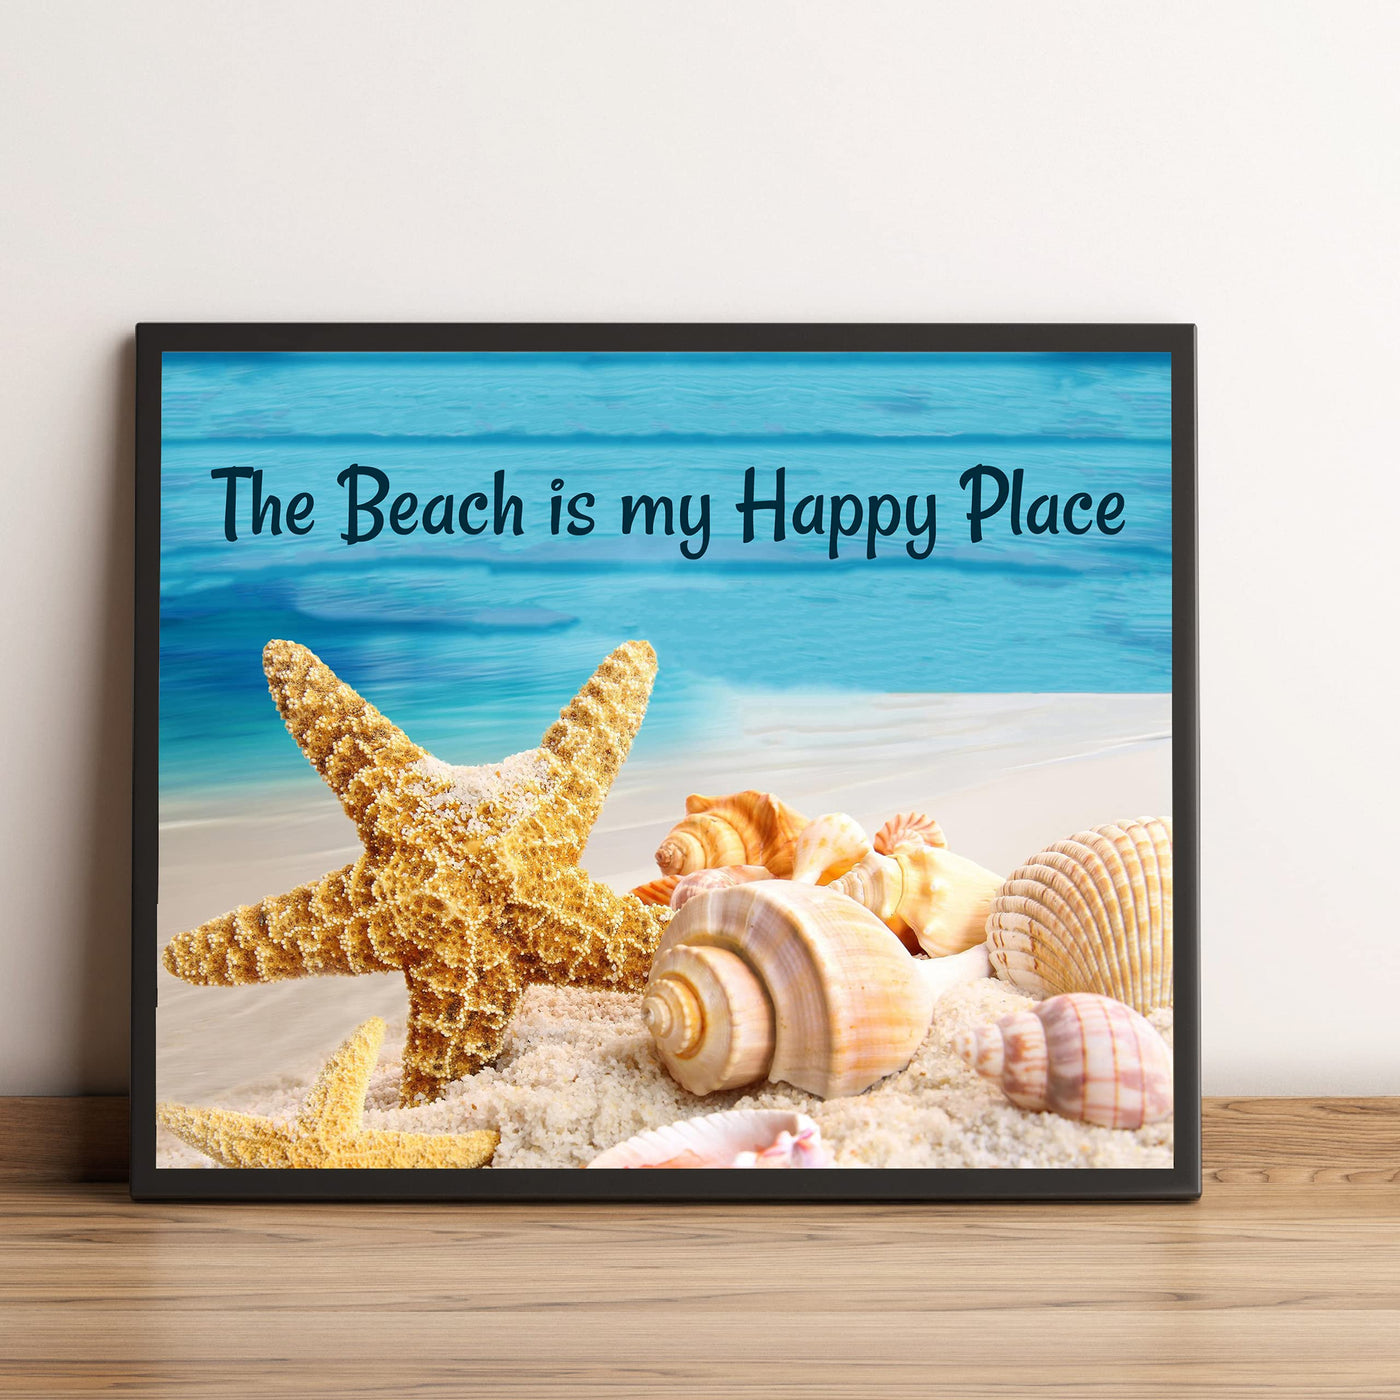 The Beach Is My Happy Place- Ocean Themed Wall Art Decor -10 x 8" Sea Shells & Starfish in the Sand Picture Print -Ready to Frame. Fun Coastal Decoration for Home-Office-Beach House Decor.